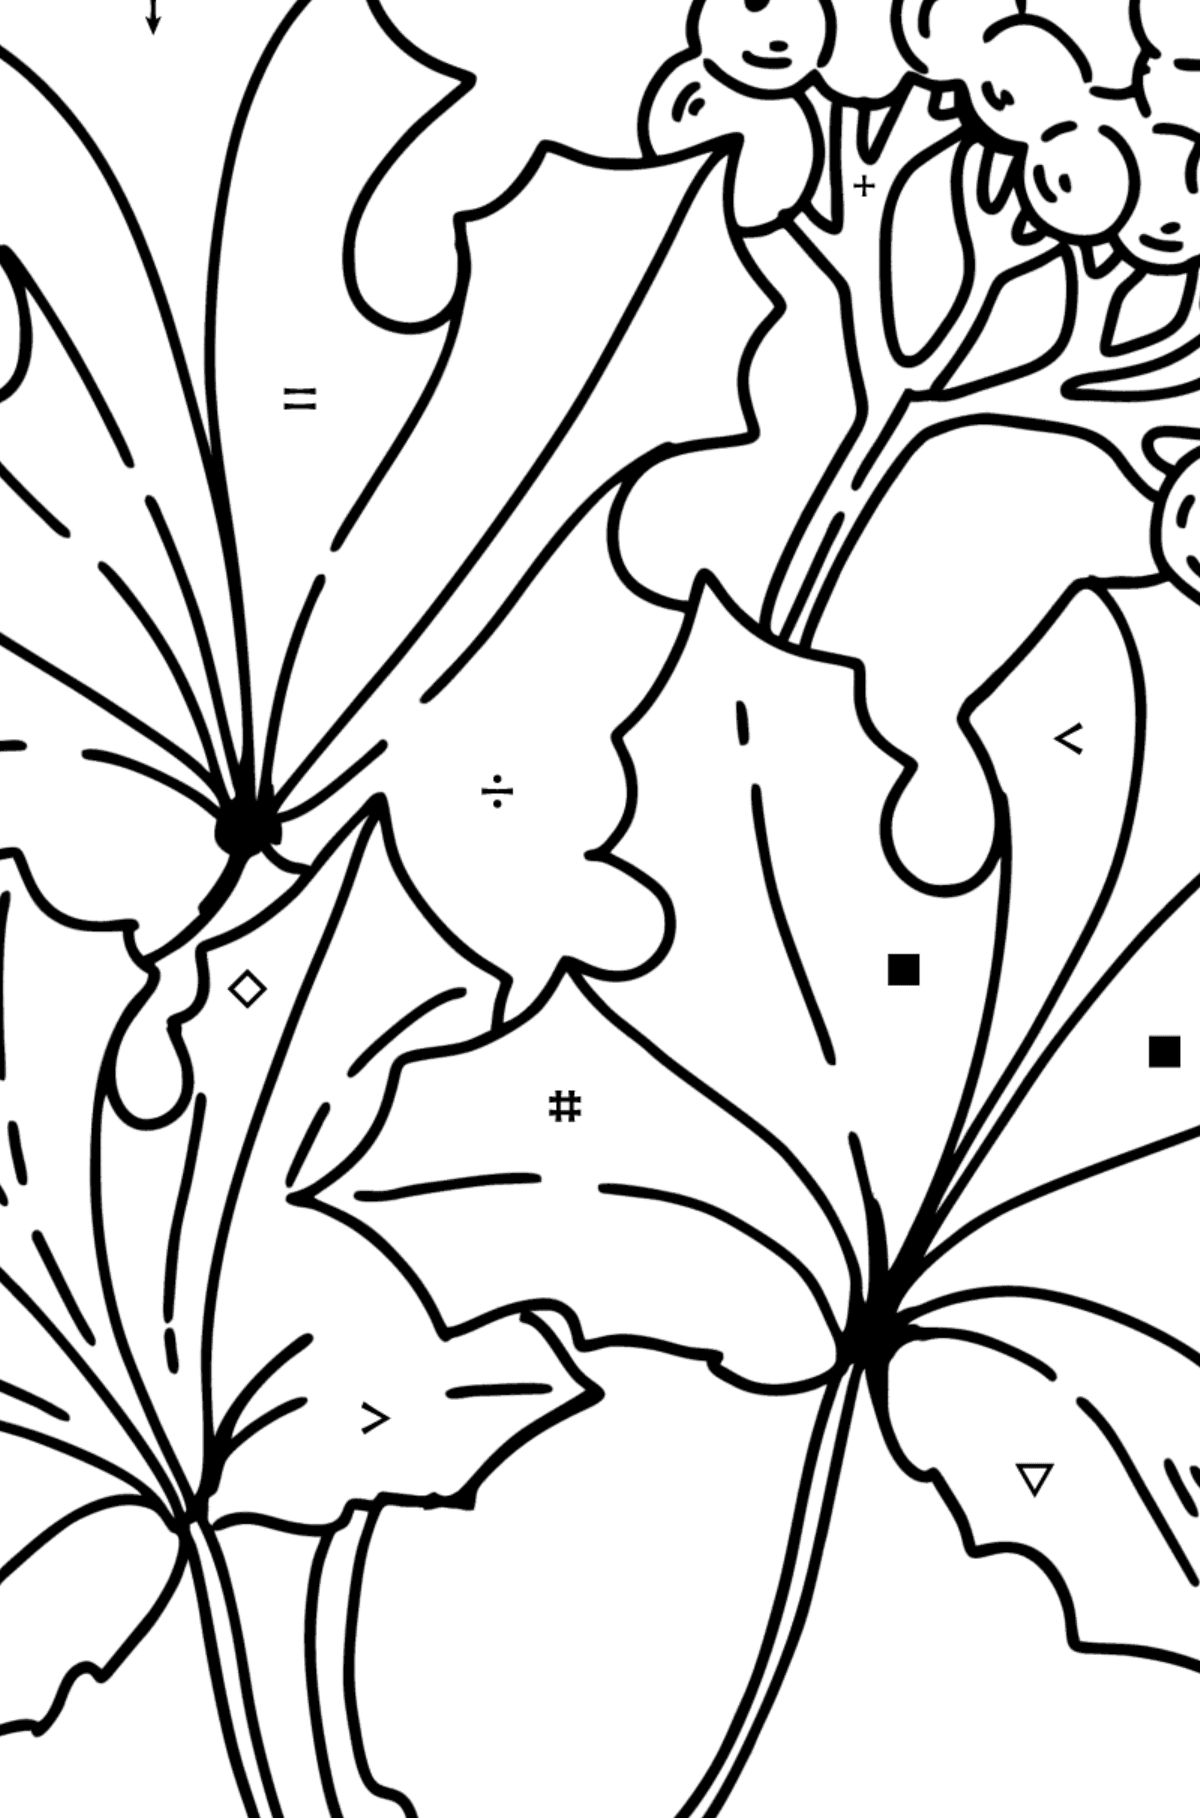 Coloring page - Maple Leaves and Elderberries - Coloring by Symbols for Kids